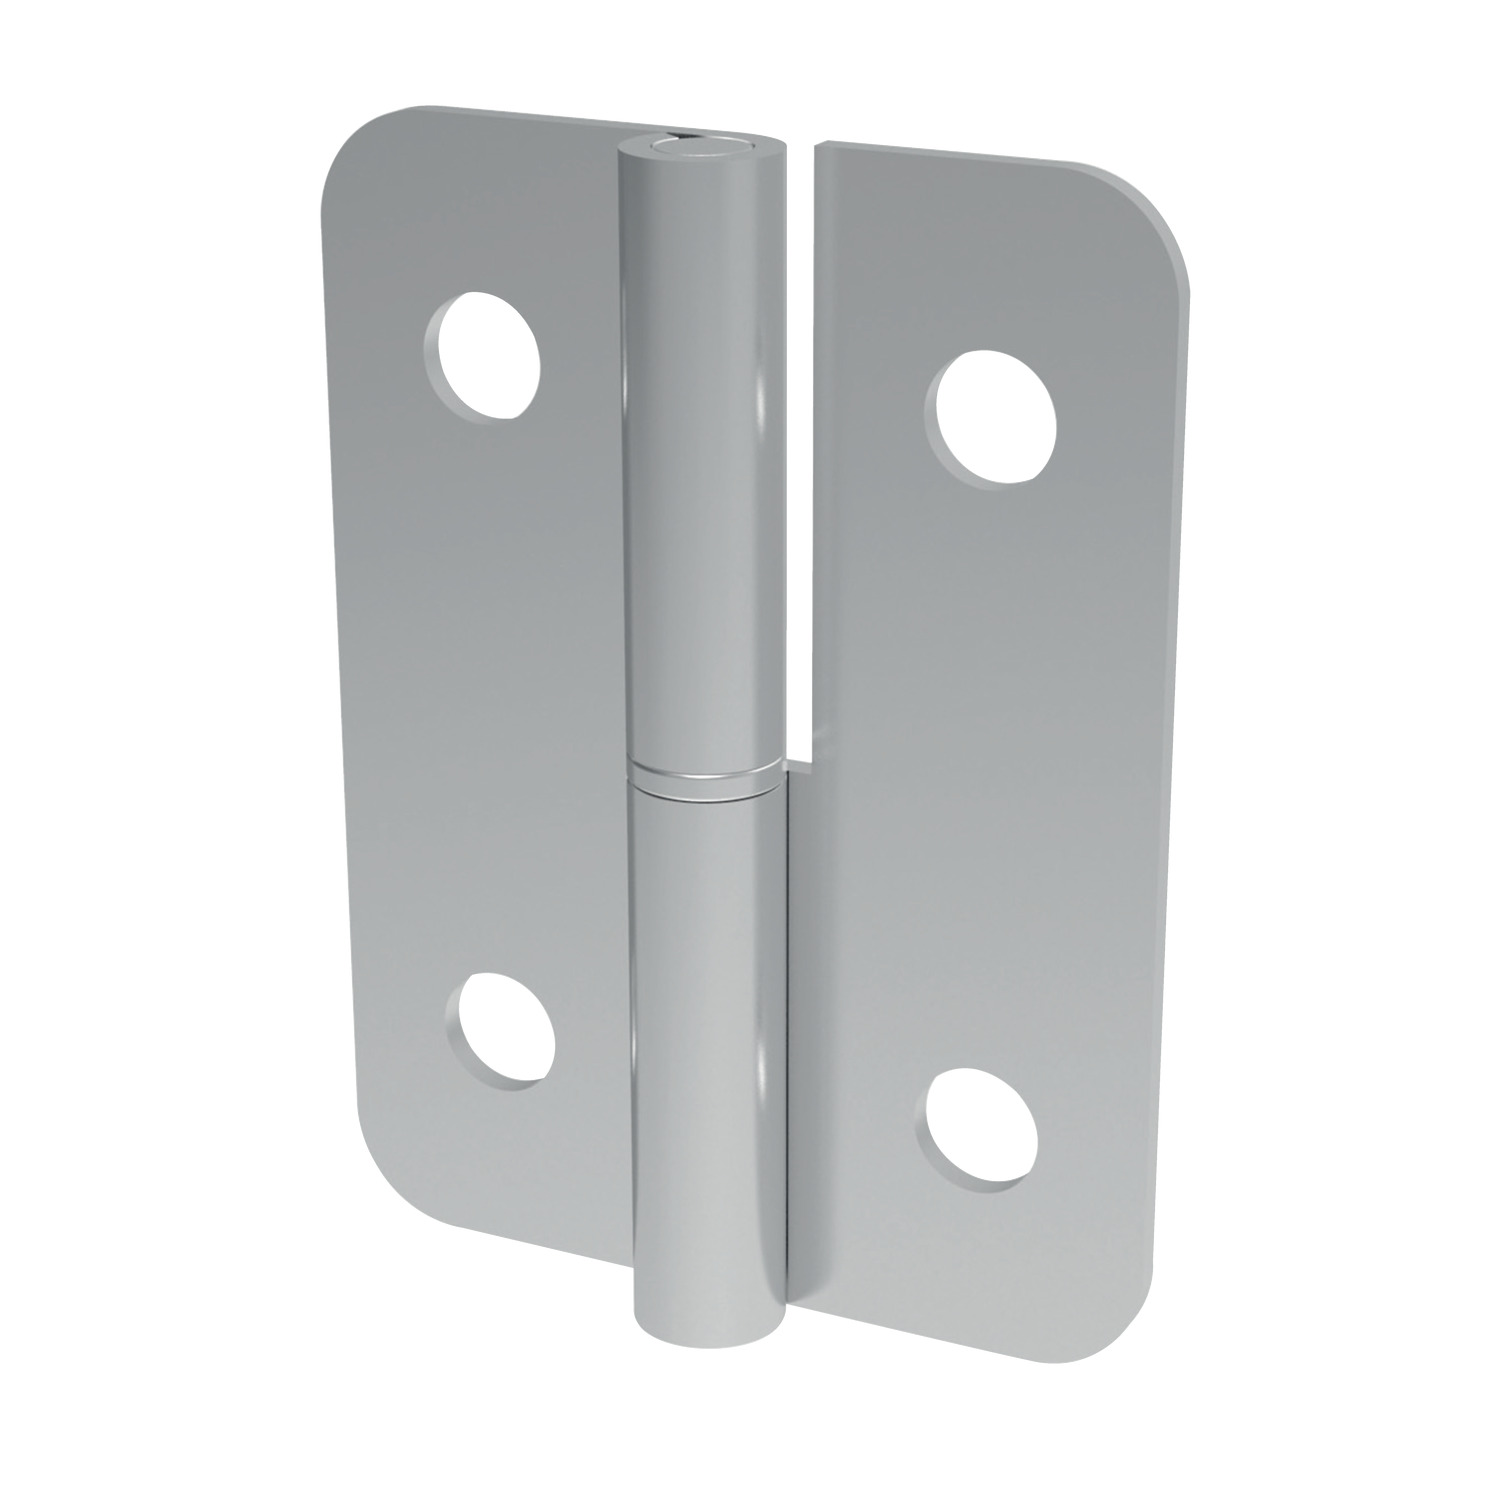 Lift-Off Hinges - Off set Screw mount off set lift-off hinges made from stainless steel (AISI 304). Opening angle of 180°.